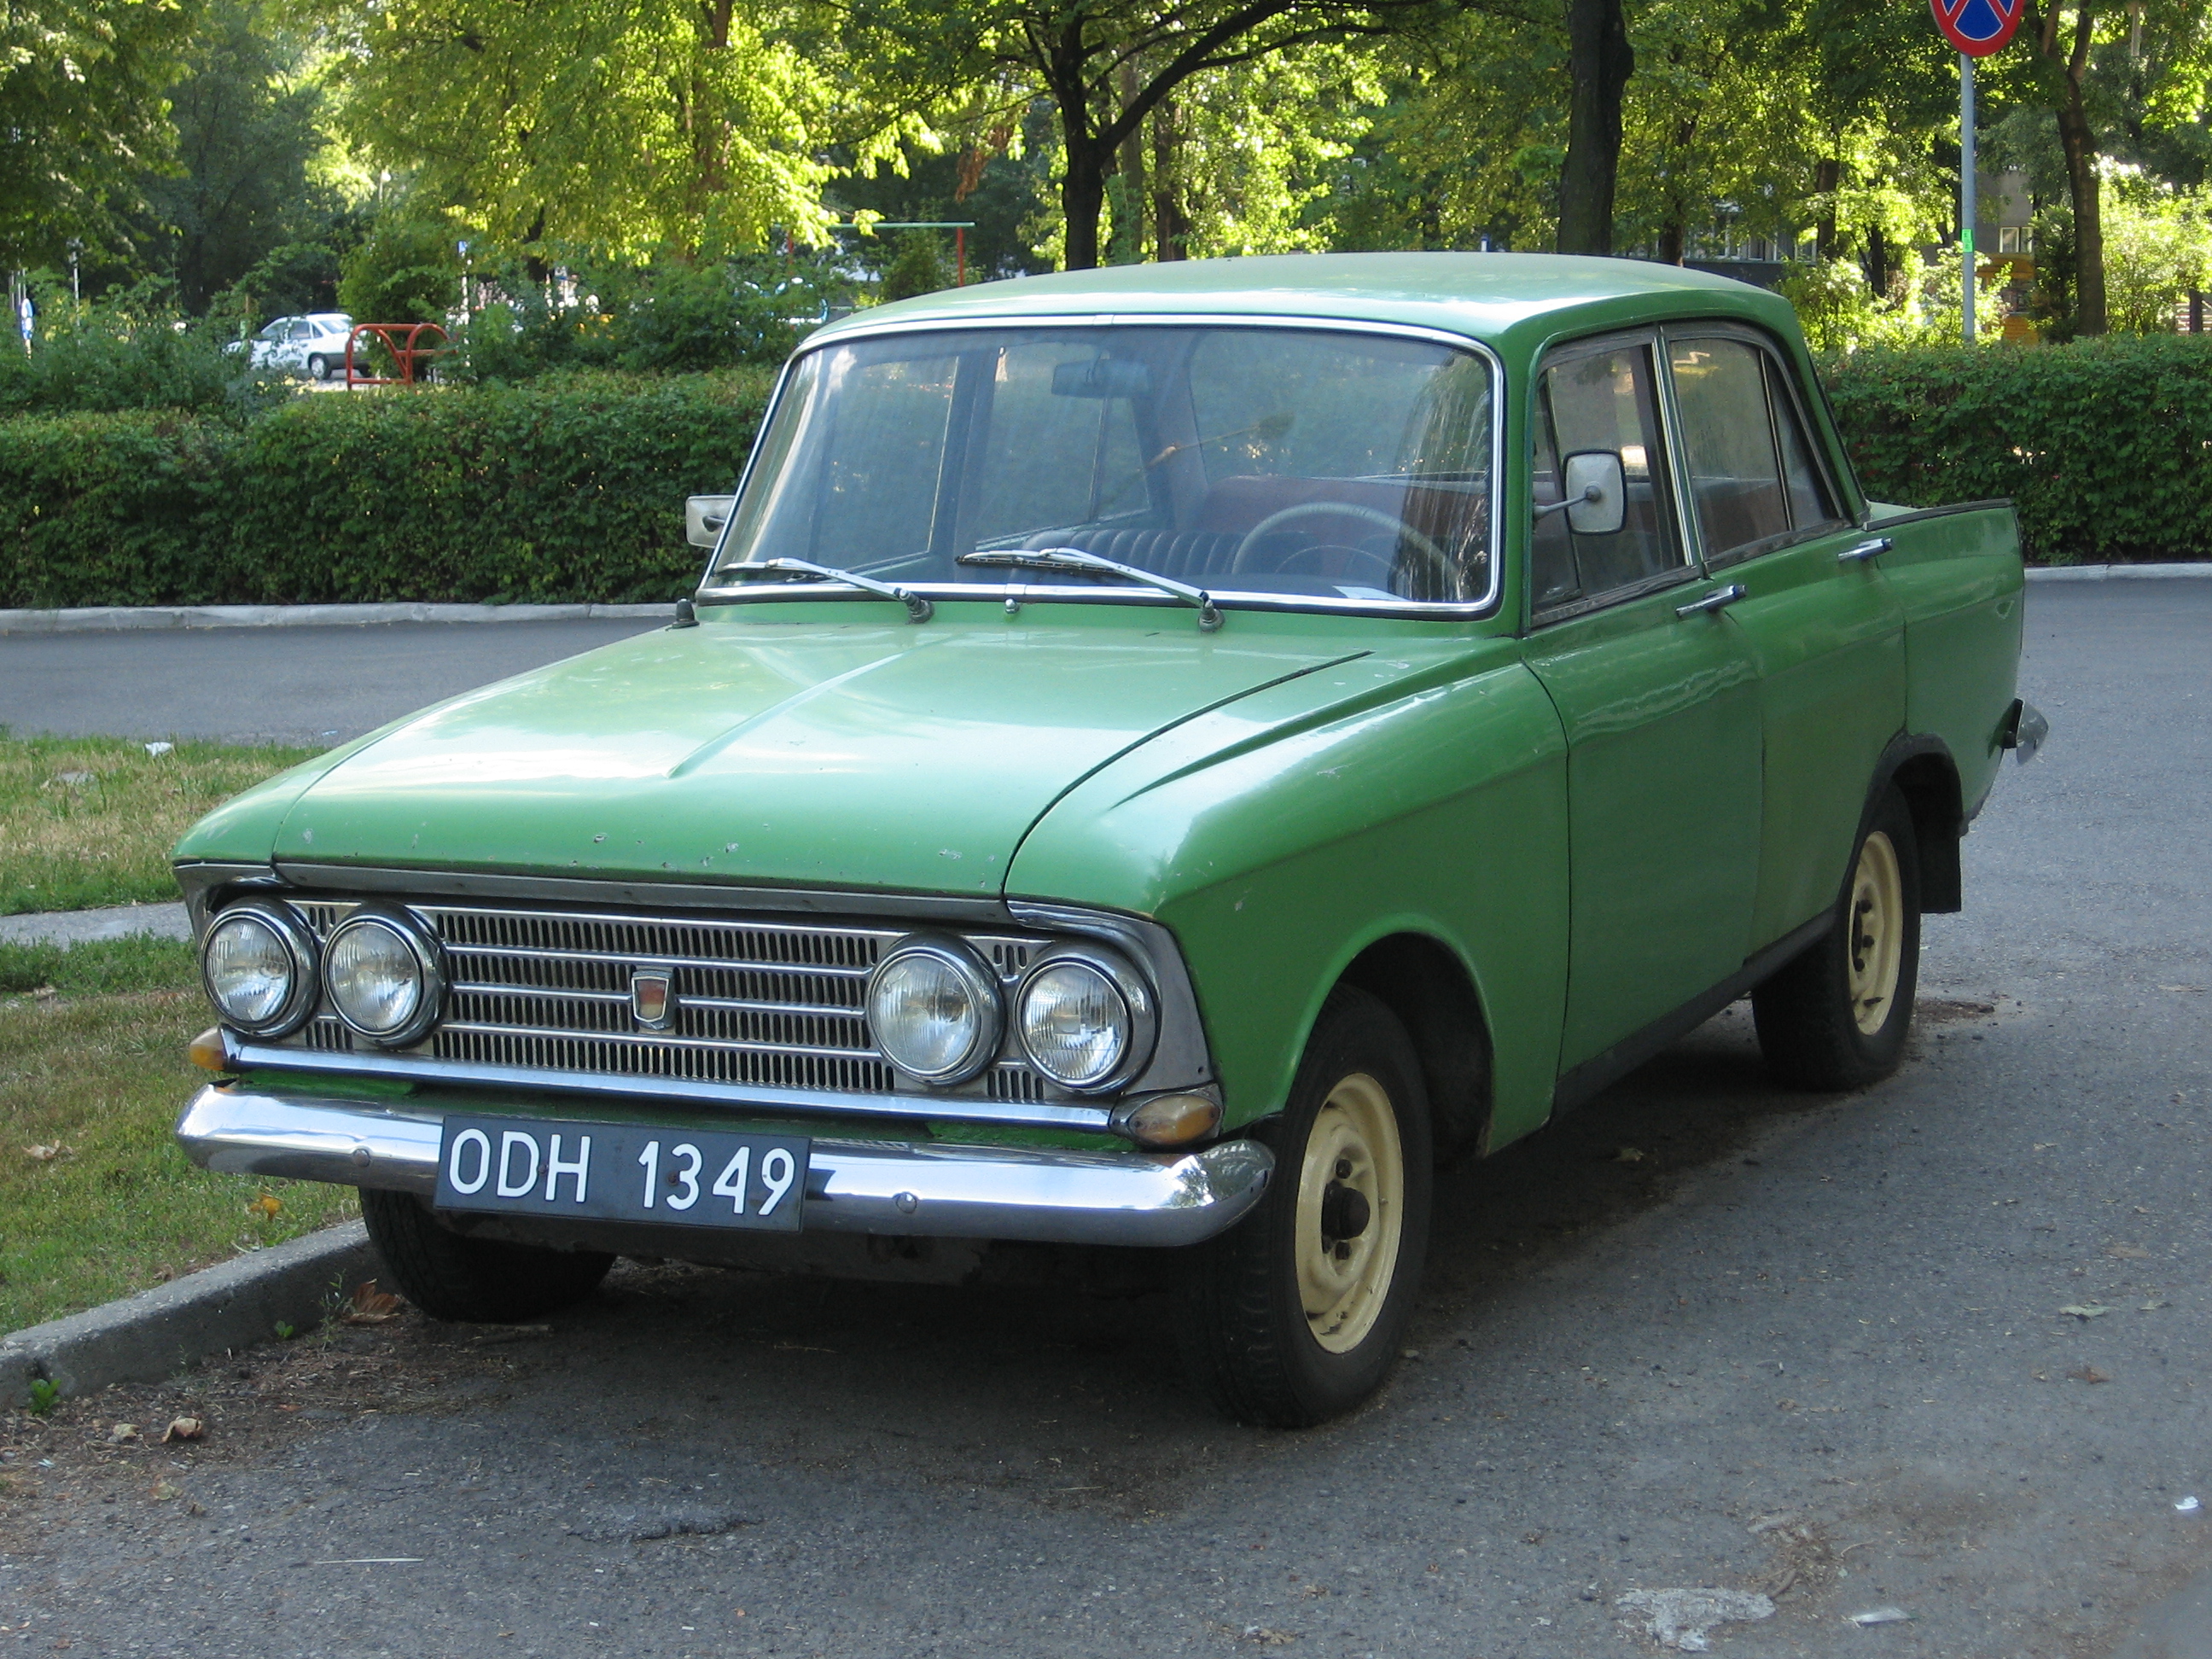 File:Moskvich green front.jpg - Wikimedia Commons